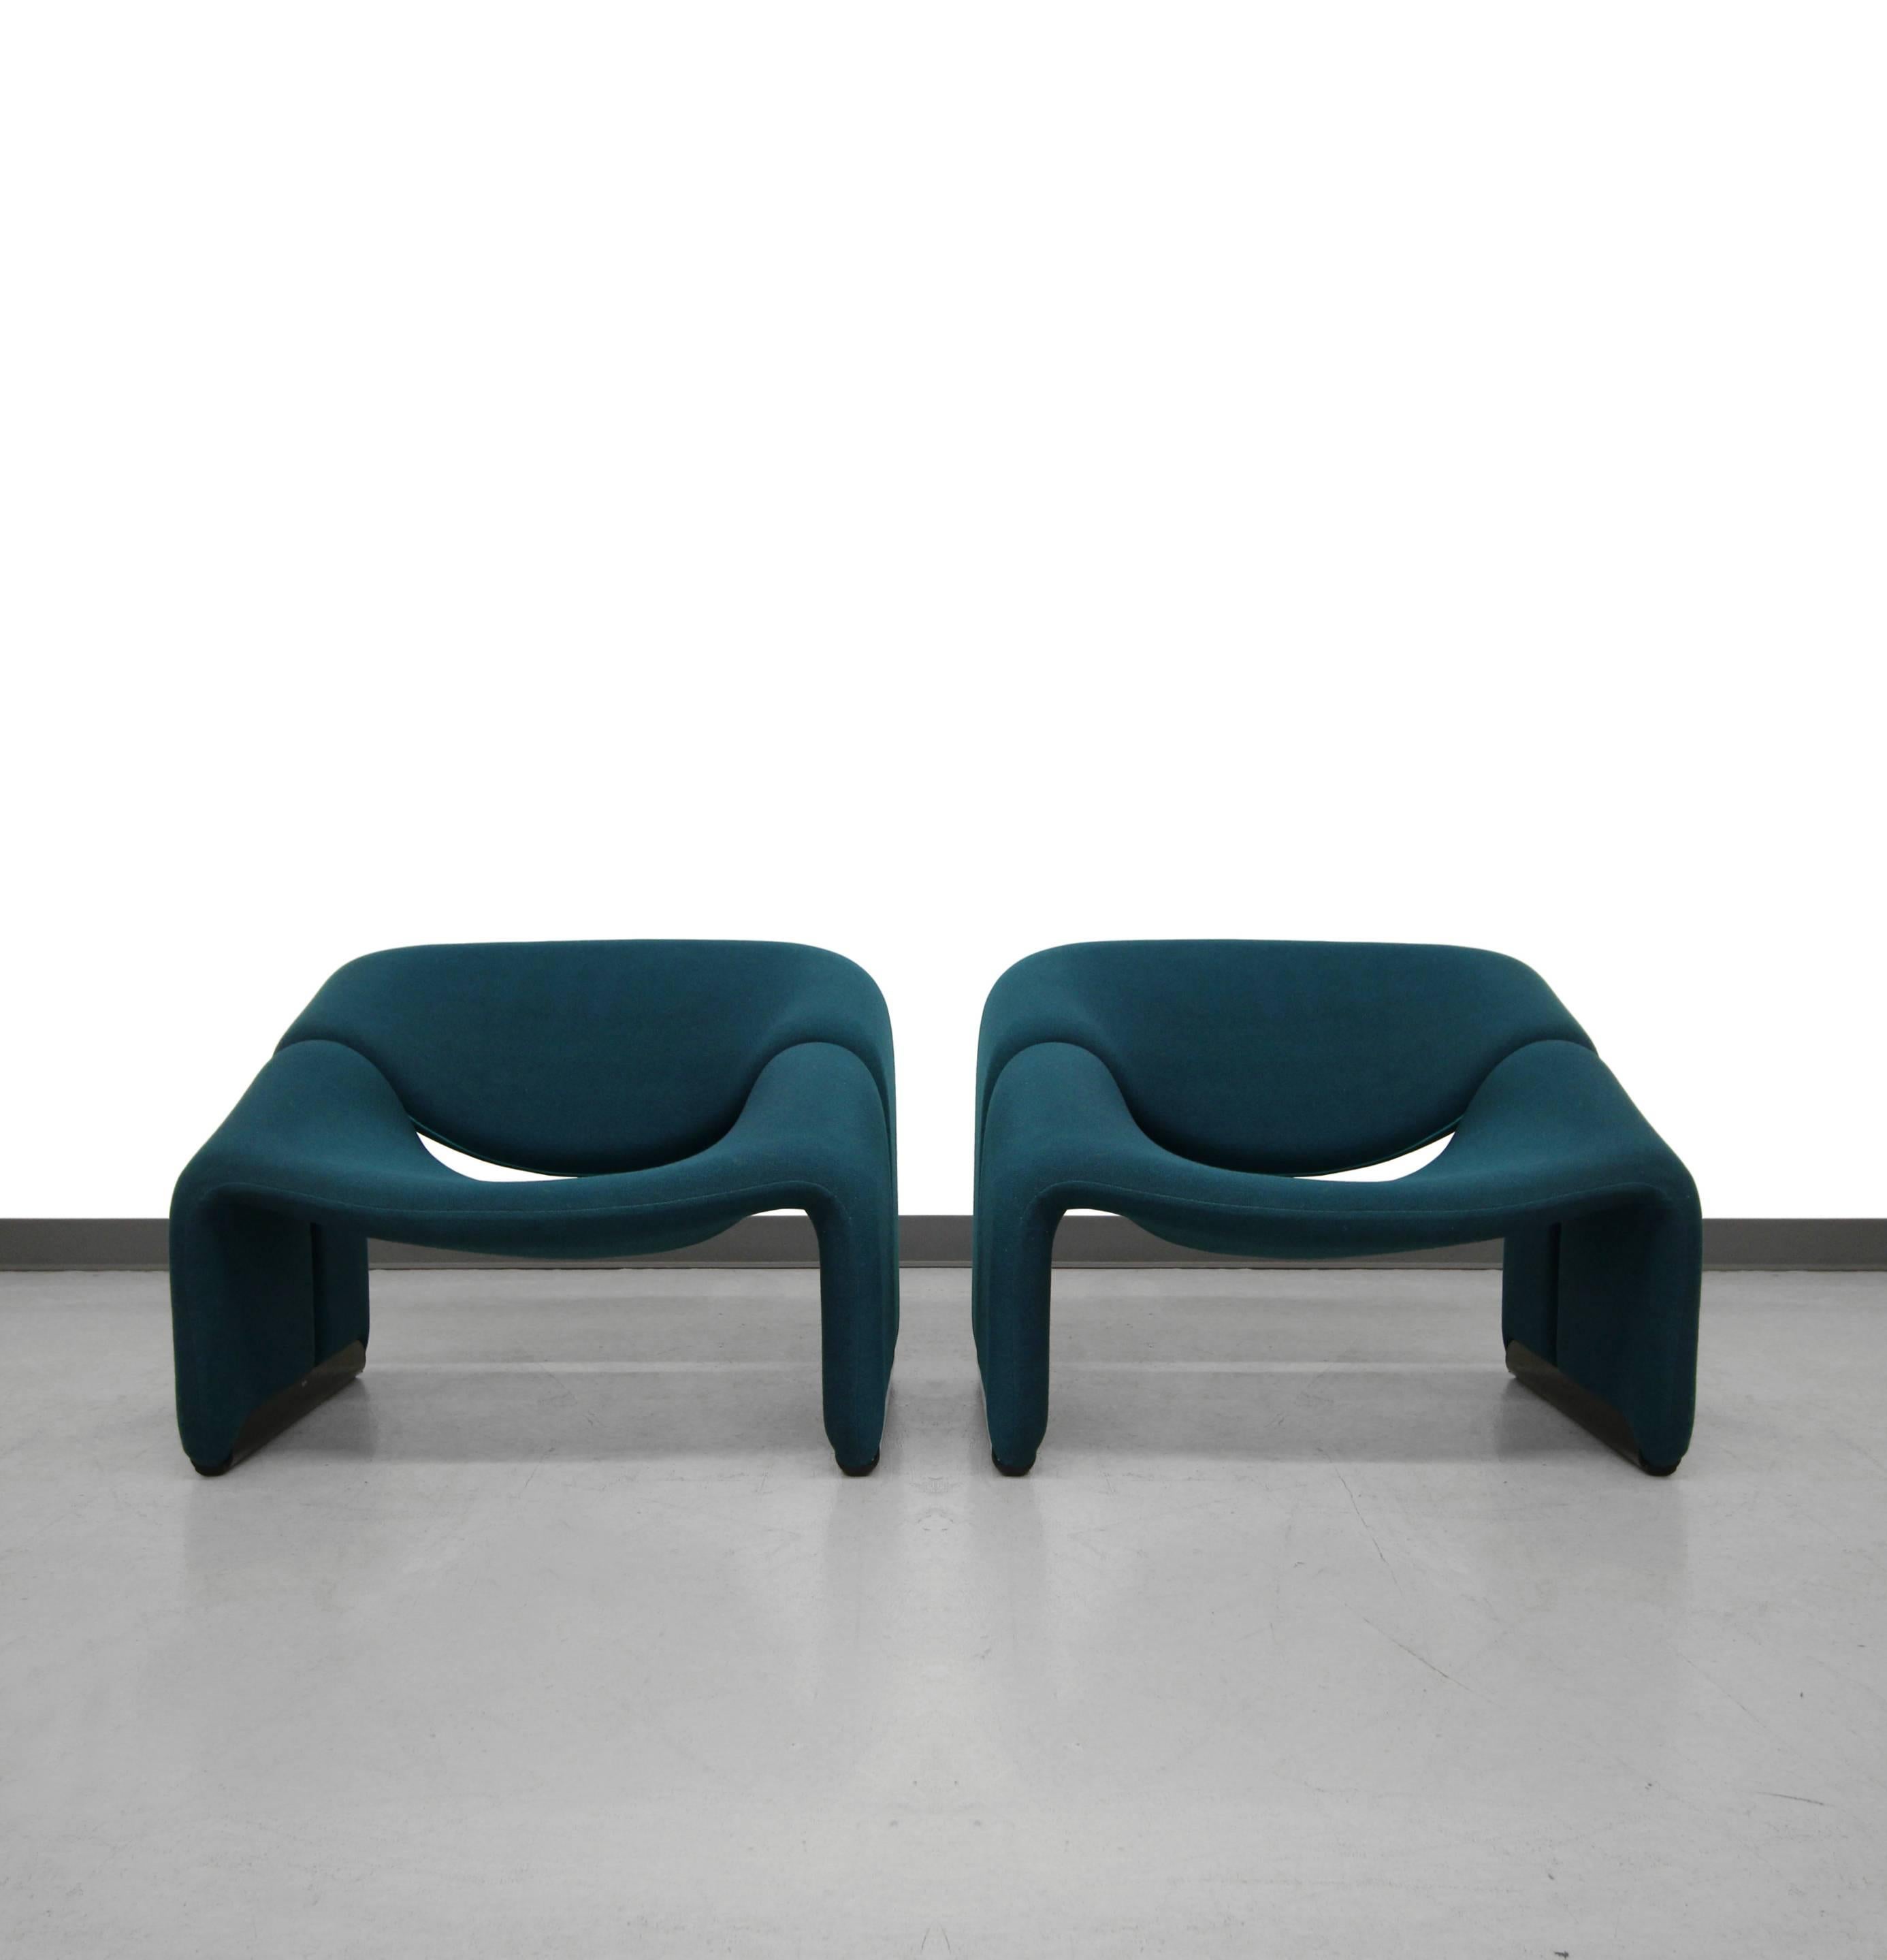 All original pair of F598 groovy chairs by Pierre Paulin for Artifort. Chairs have original dark teal tweed upholstery and black metal floor glides. They are in excellent all original condition. A rare find indeed.